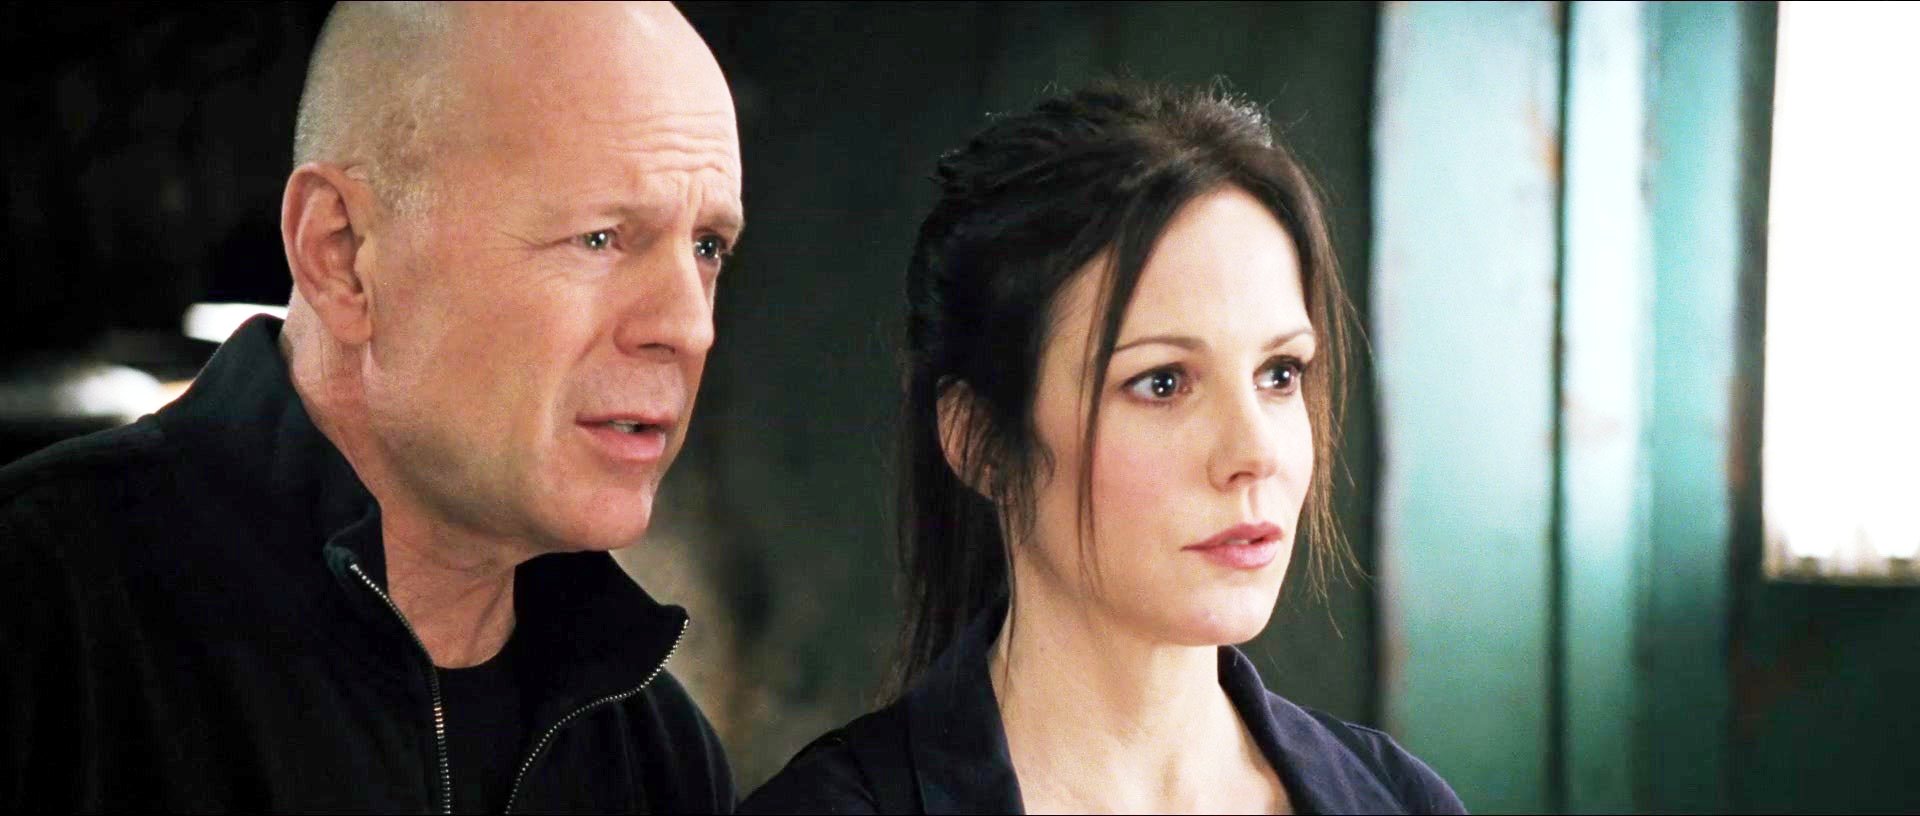 Bruce Willis stars as Frank Moses and Mary-Louise Parker stars as Sarah in Summit Entertainment's Red (2010)